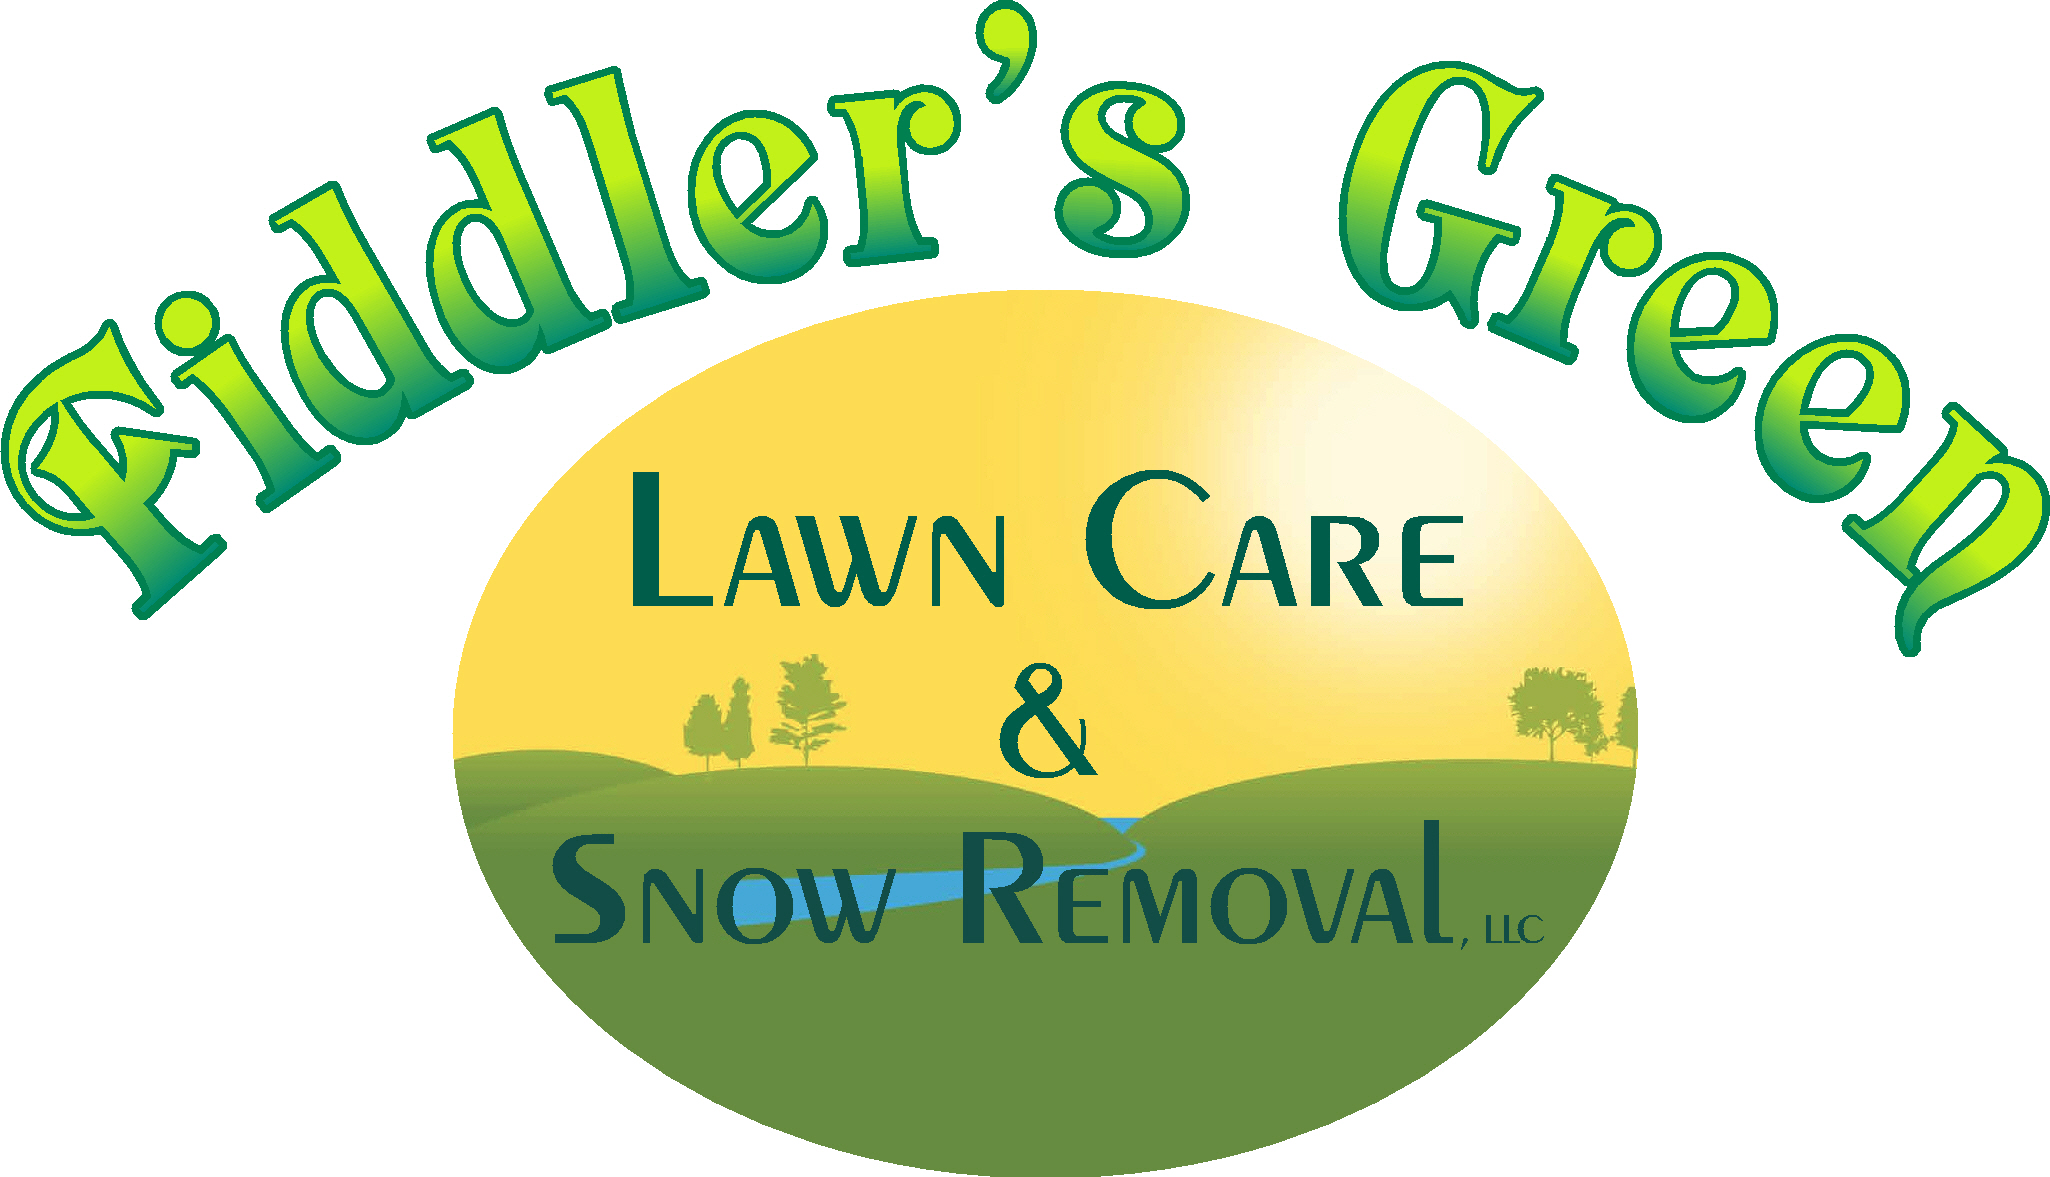 Fiddlers Green Lawn Care & Snow Removal, LLC Logo